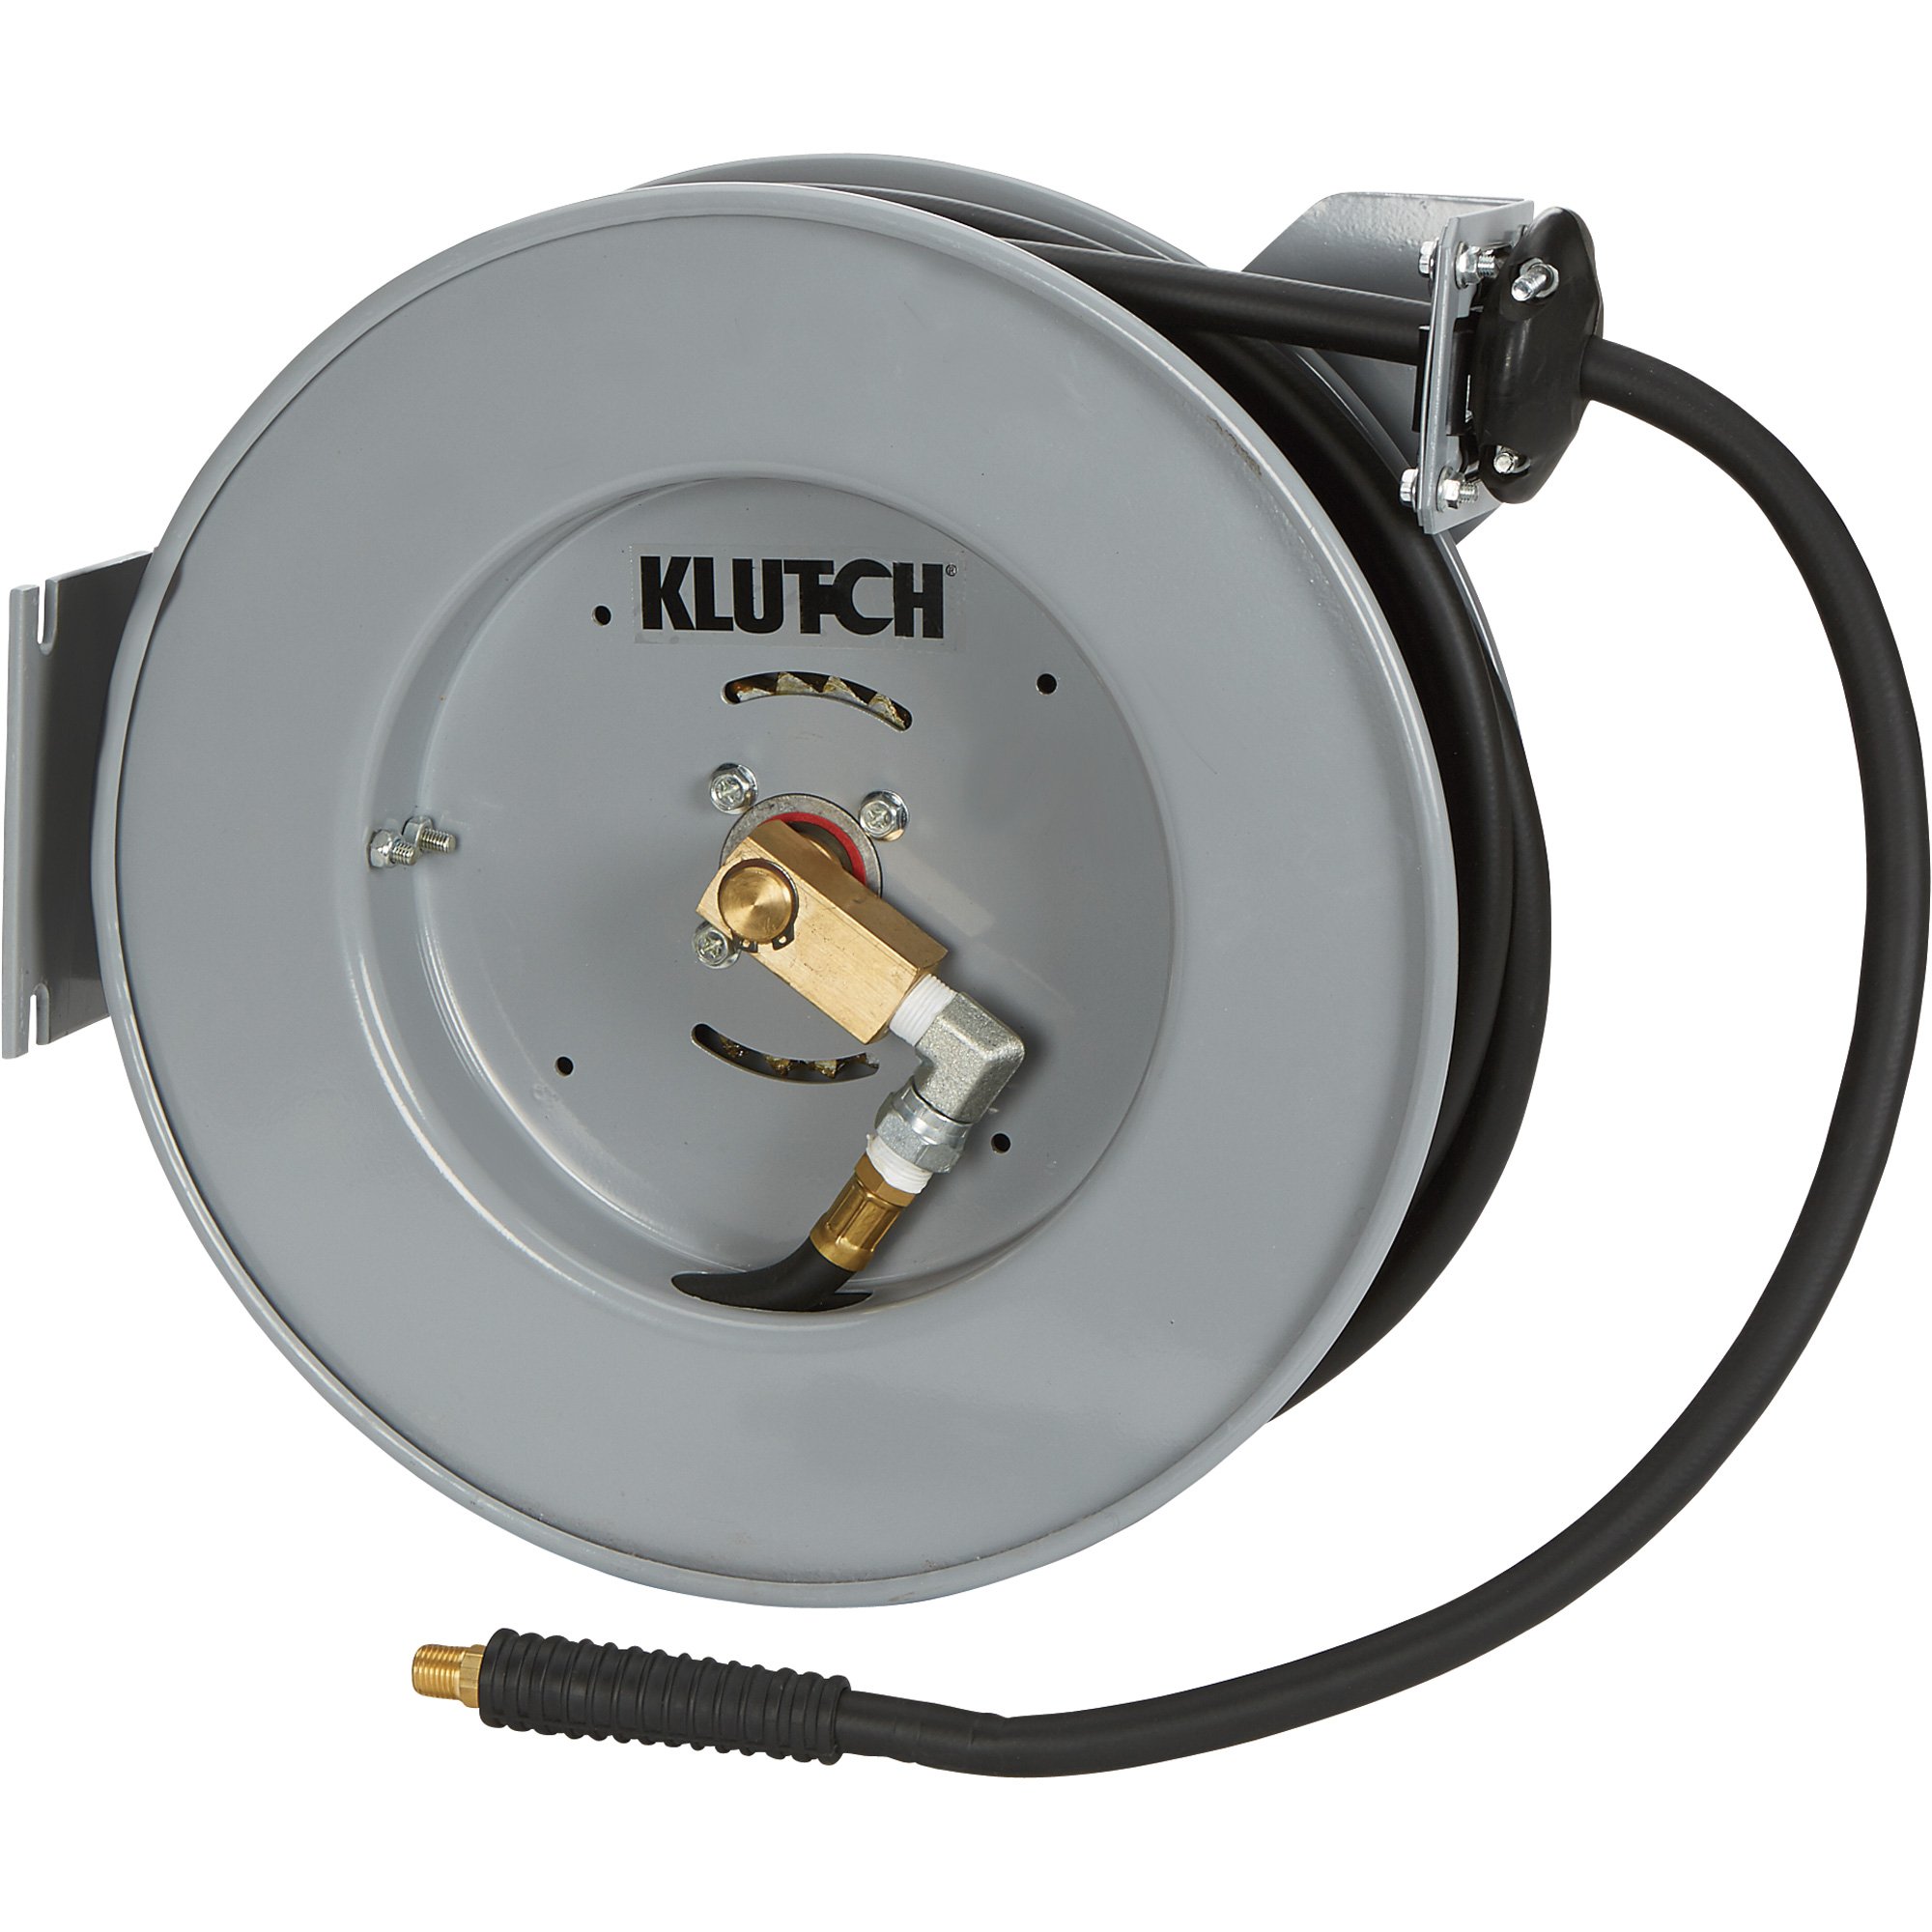 Klutch Compact Auto Rewind Air Hose Reel — With 3/8in. x 50ft